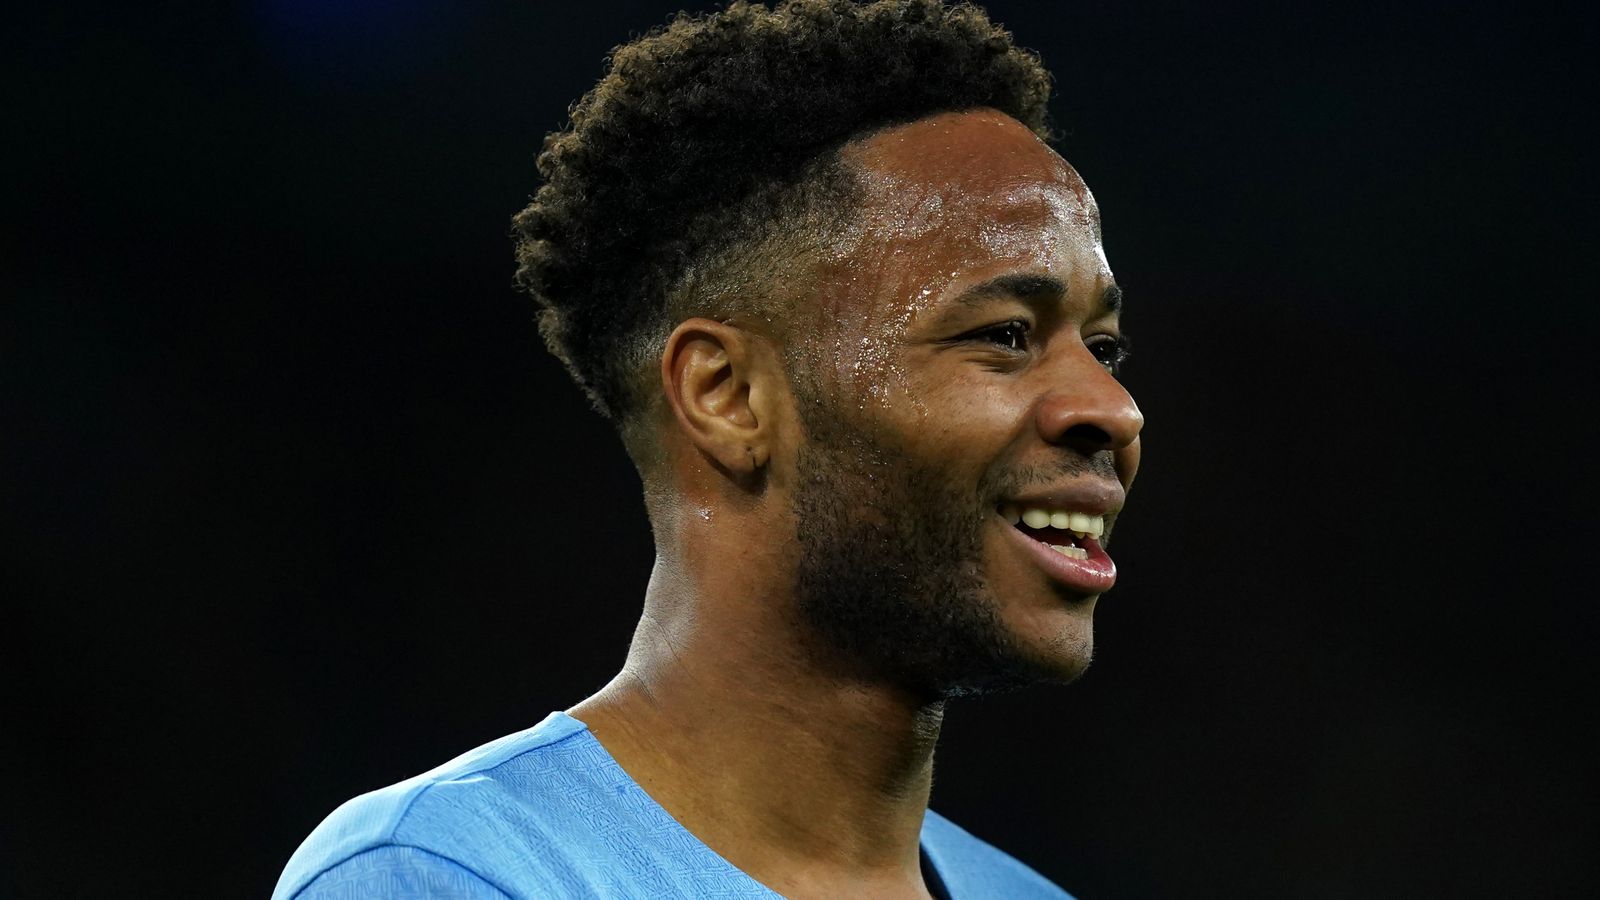 Raheem Sterling: Chelsea agree £47.5m fee with Man City for forward